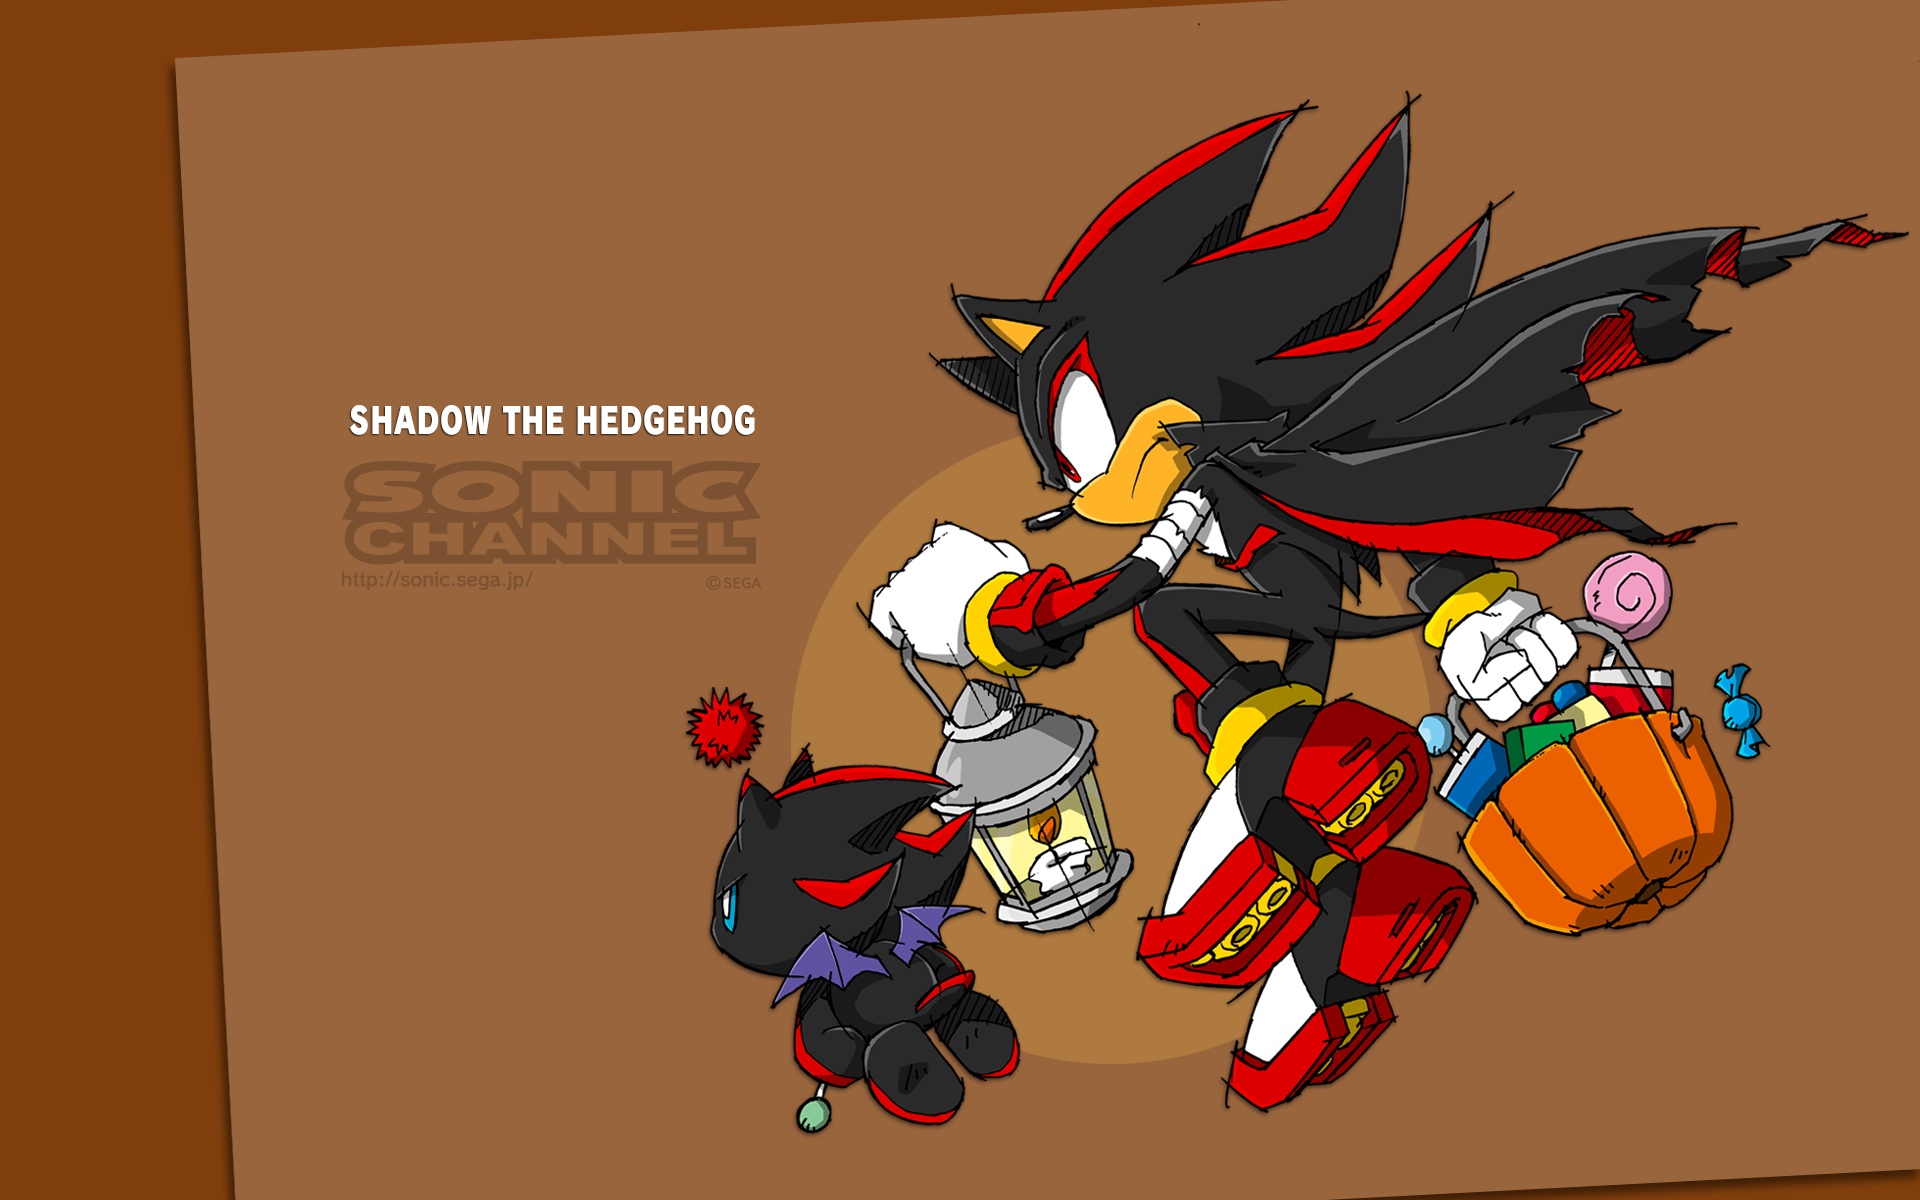 Shadow the Hedgehog (October 2013) Channel Wallpaper